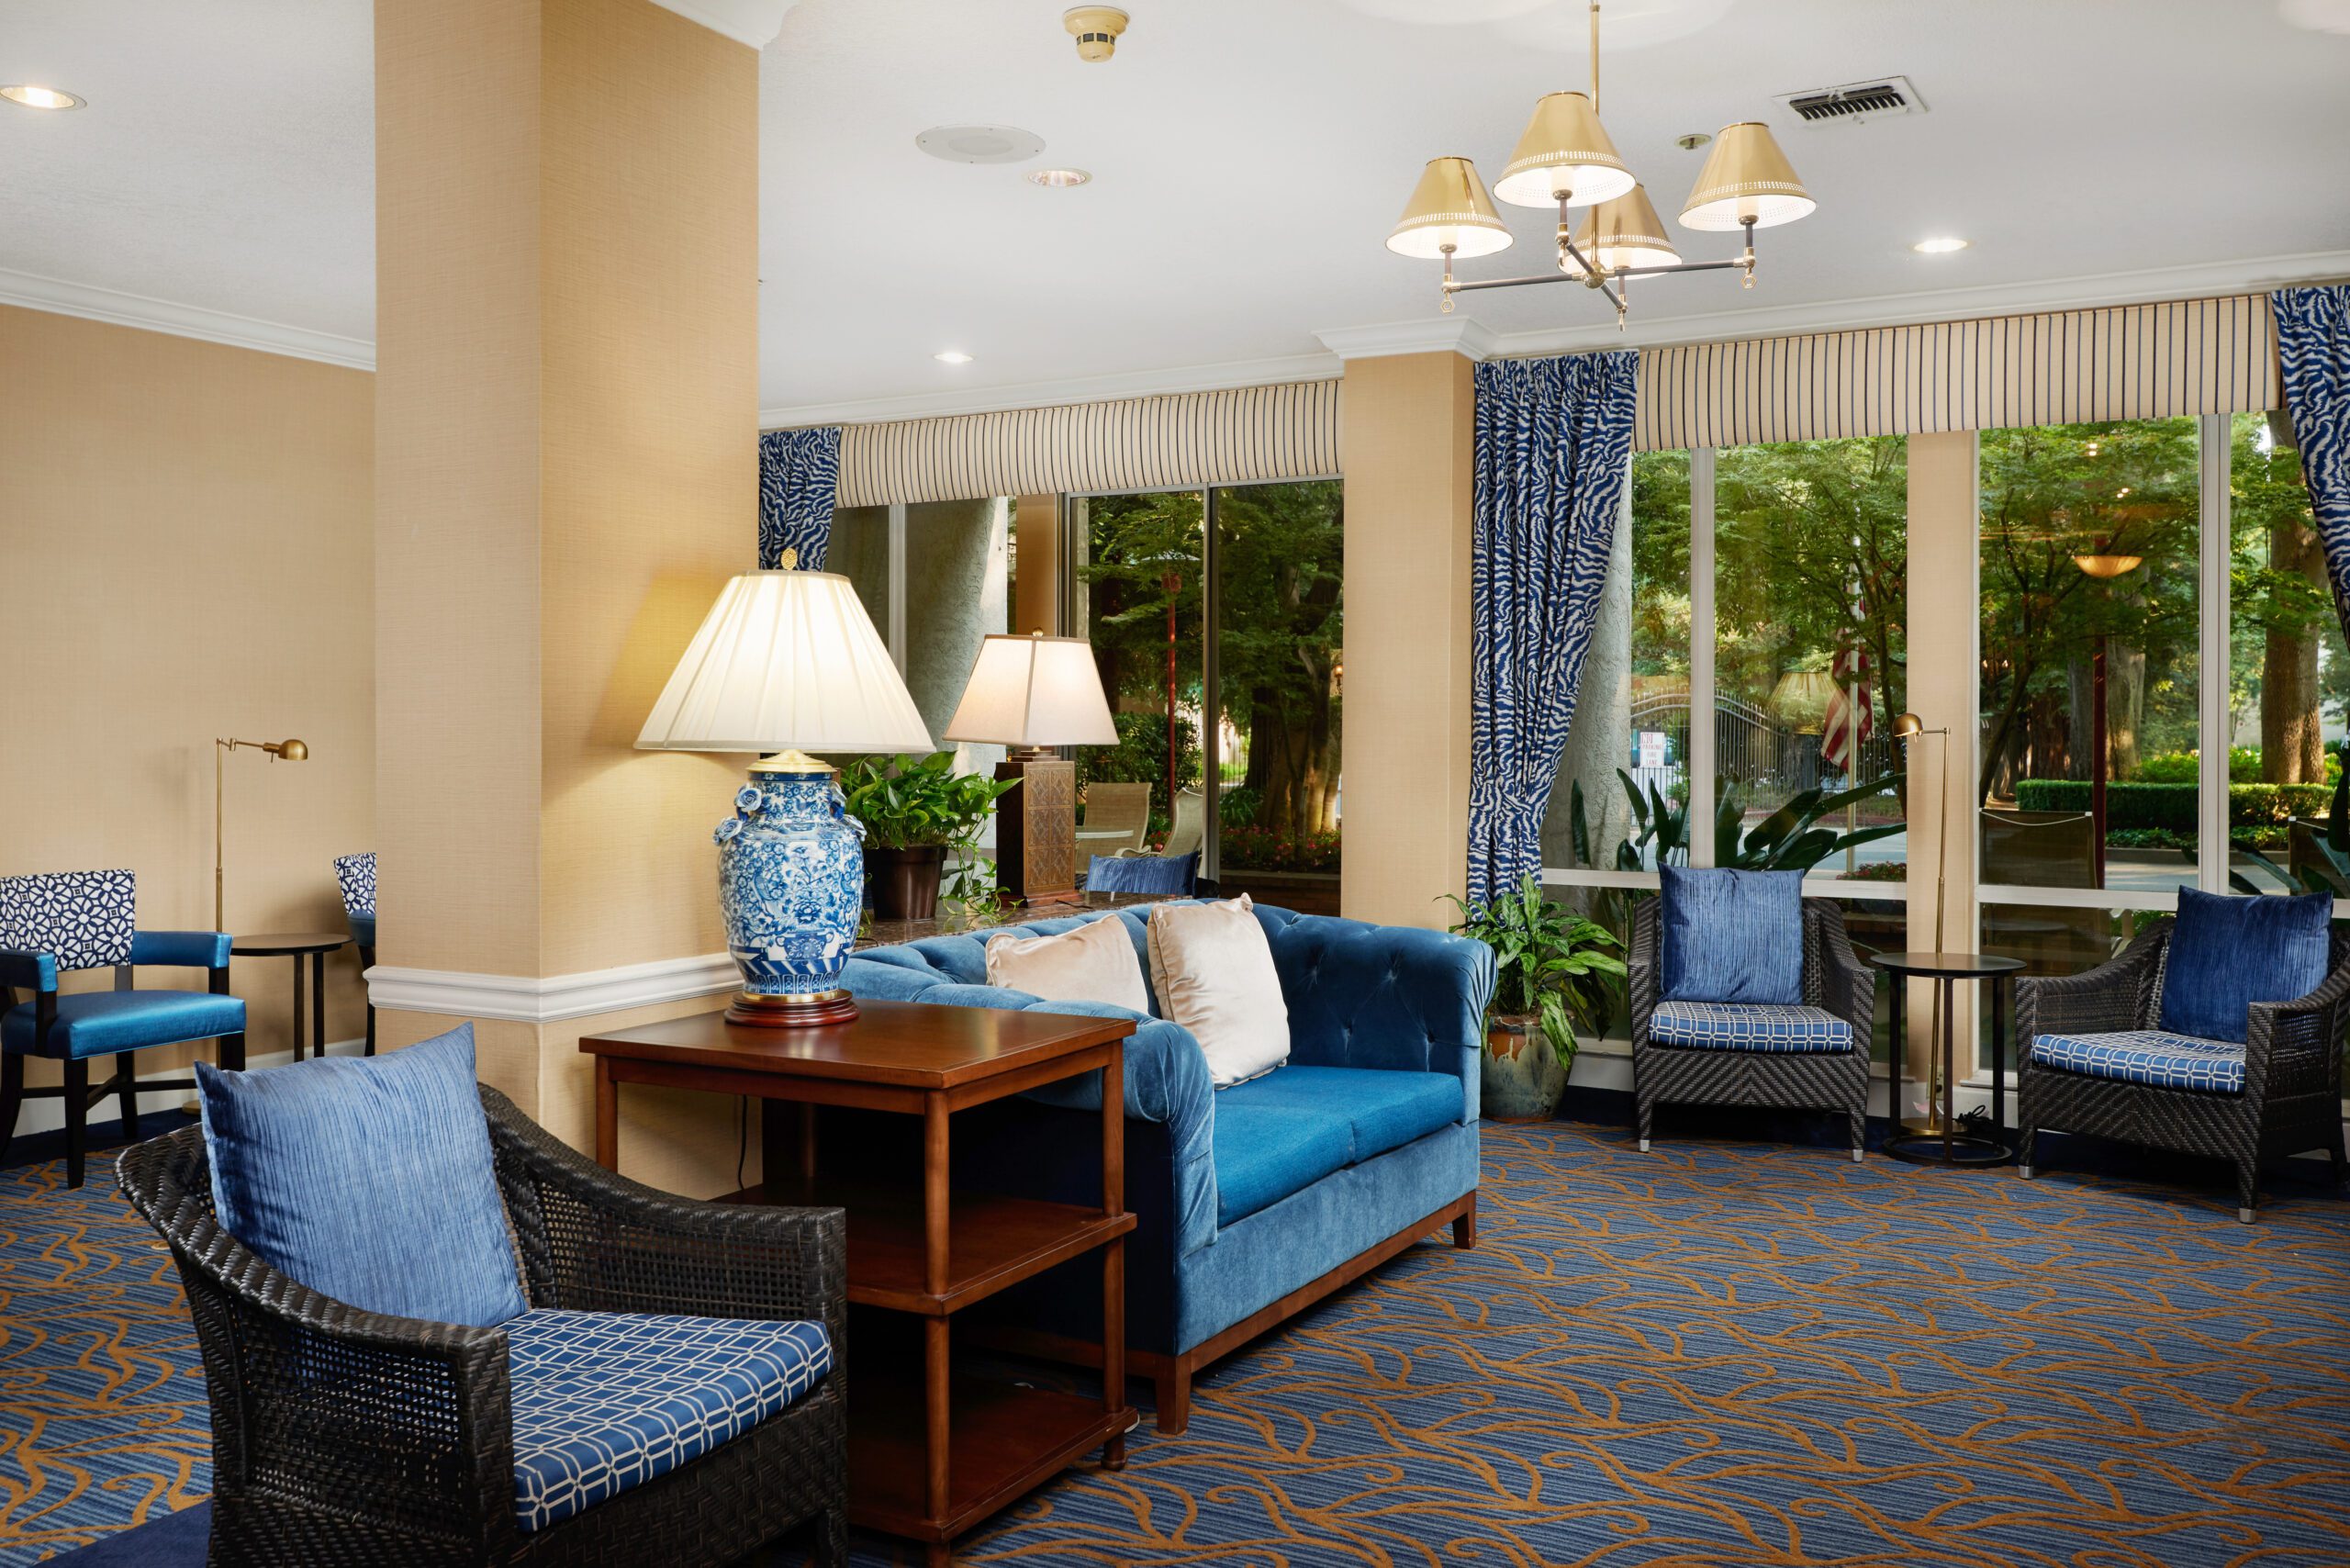 upscale living room at a retirement community with blue furniture